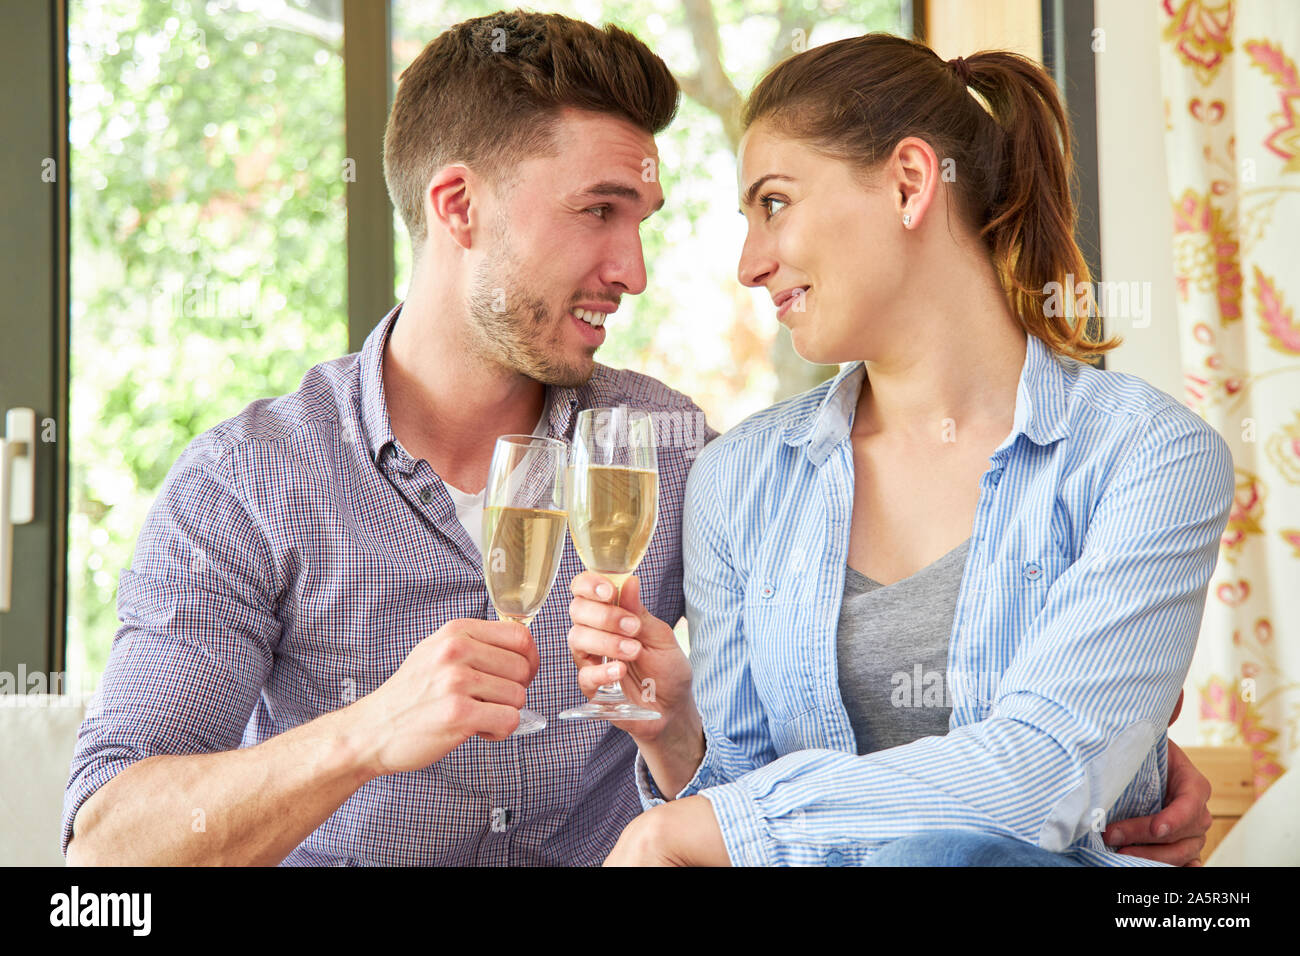 Young couple in love celebrates engagement or reconciliation with a glass of sparkling wine Stock Photo